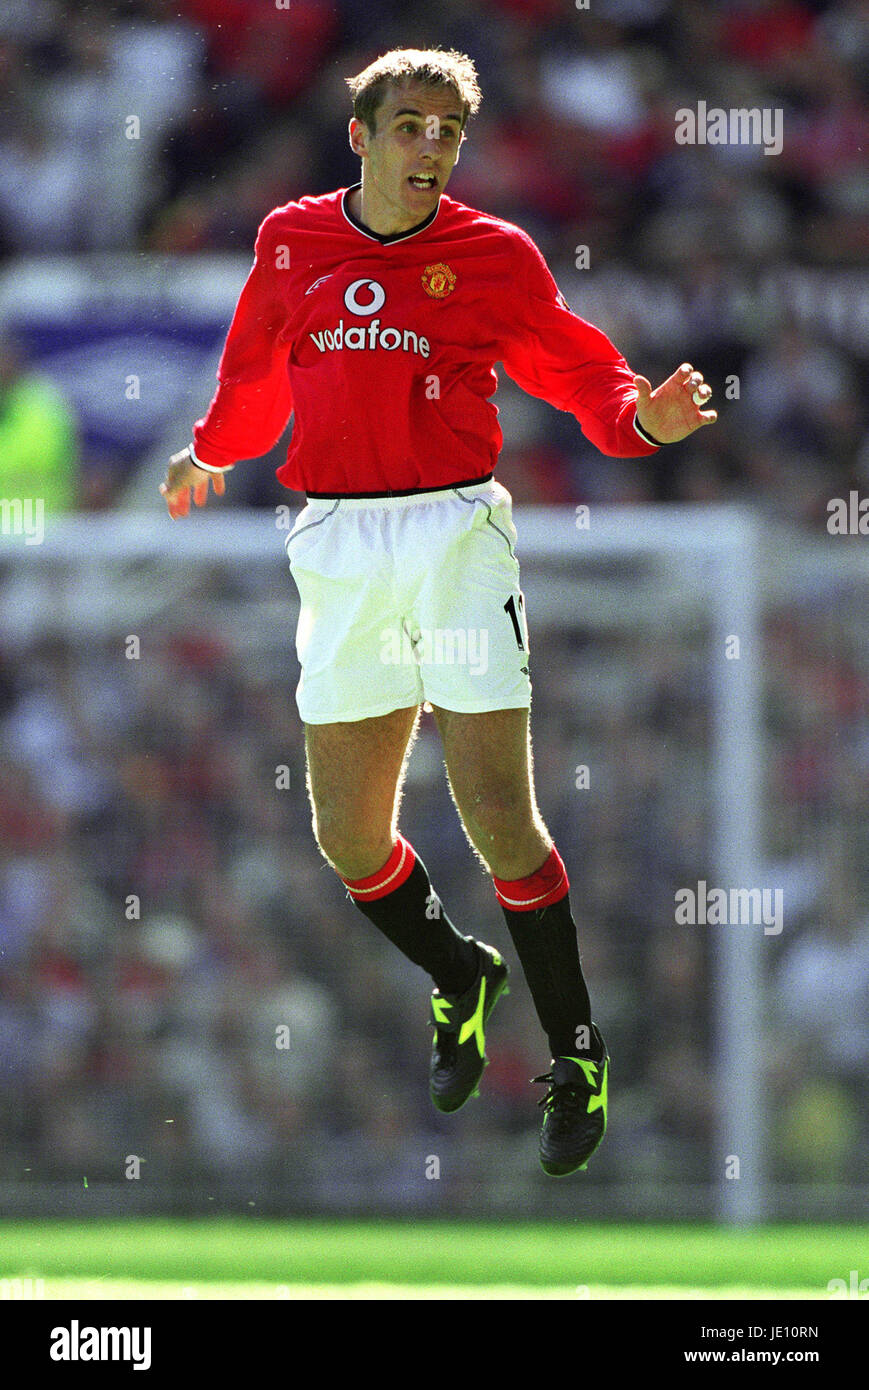 PHILIP NEVILLE MANCHESTER UNITED FC OLD TRAFFORD MANCHESTER 08 Septembre 2001 Banque D'Images